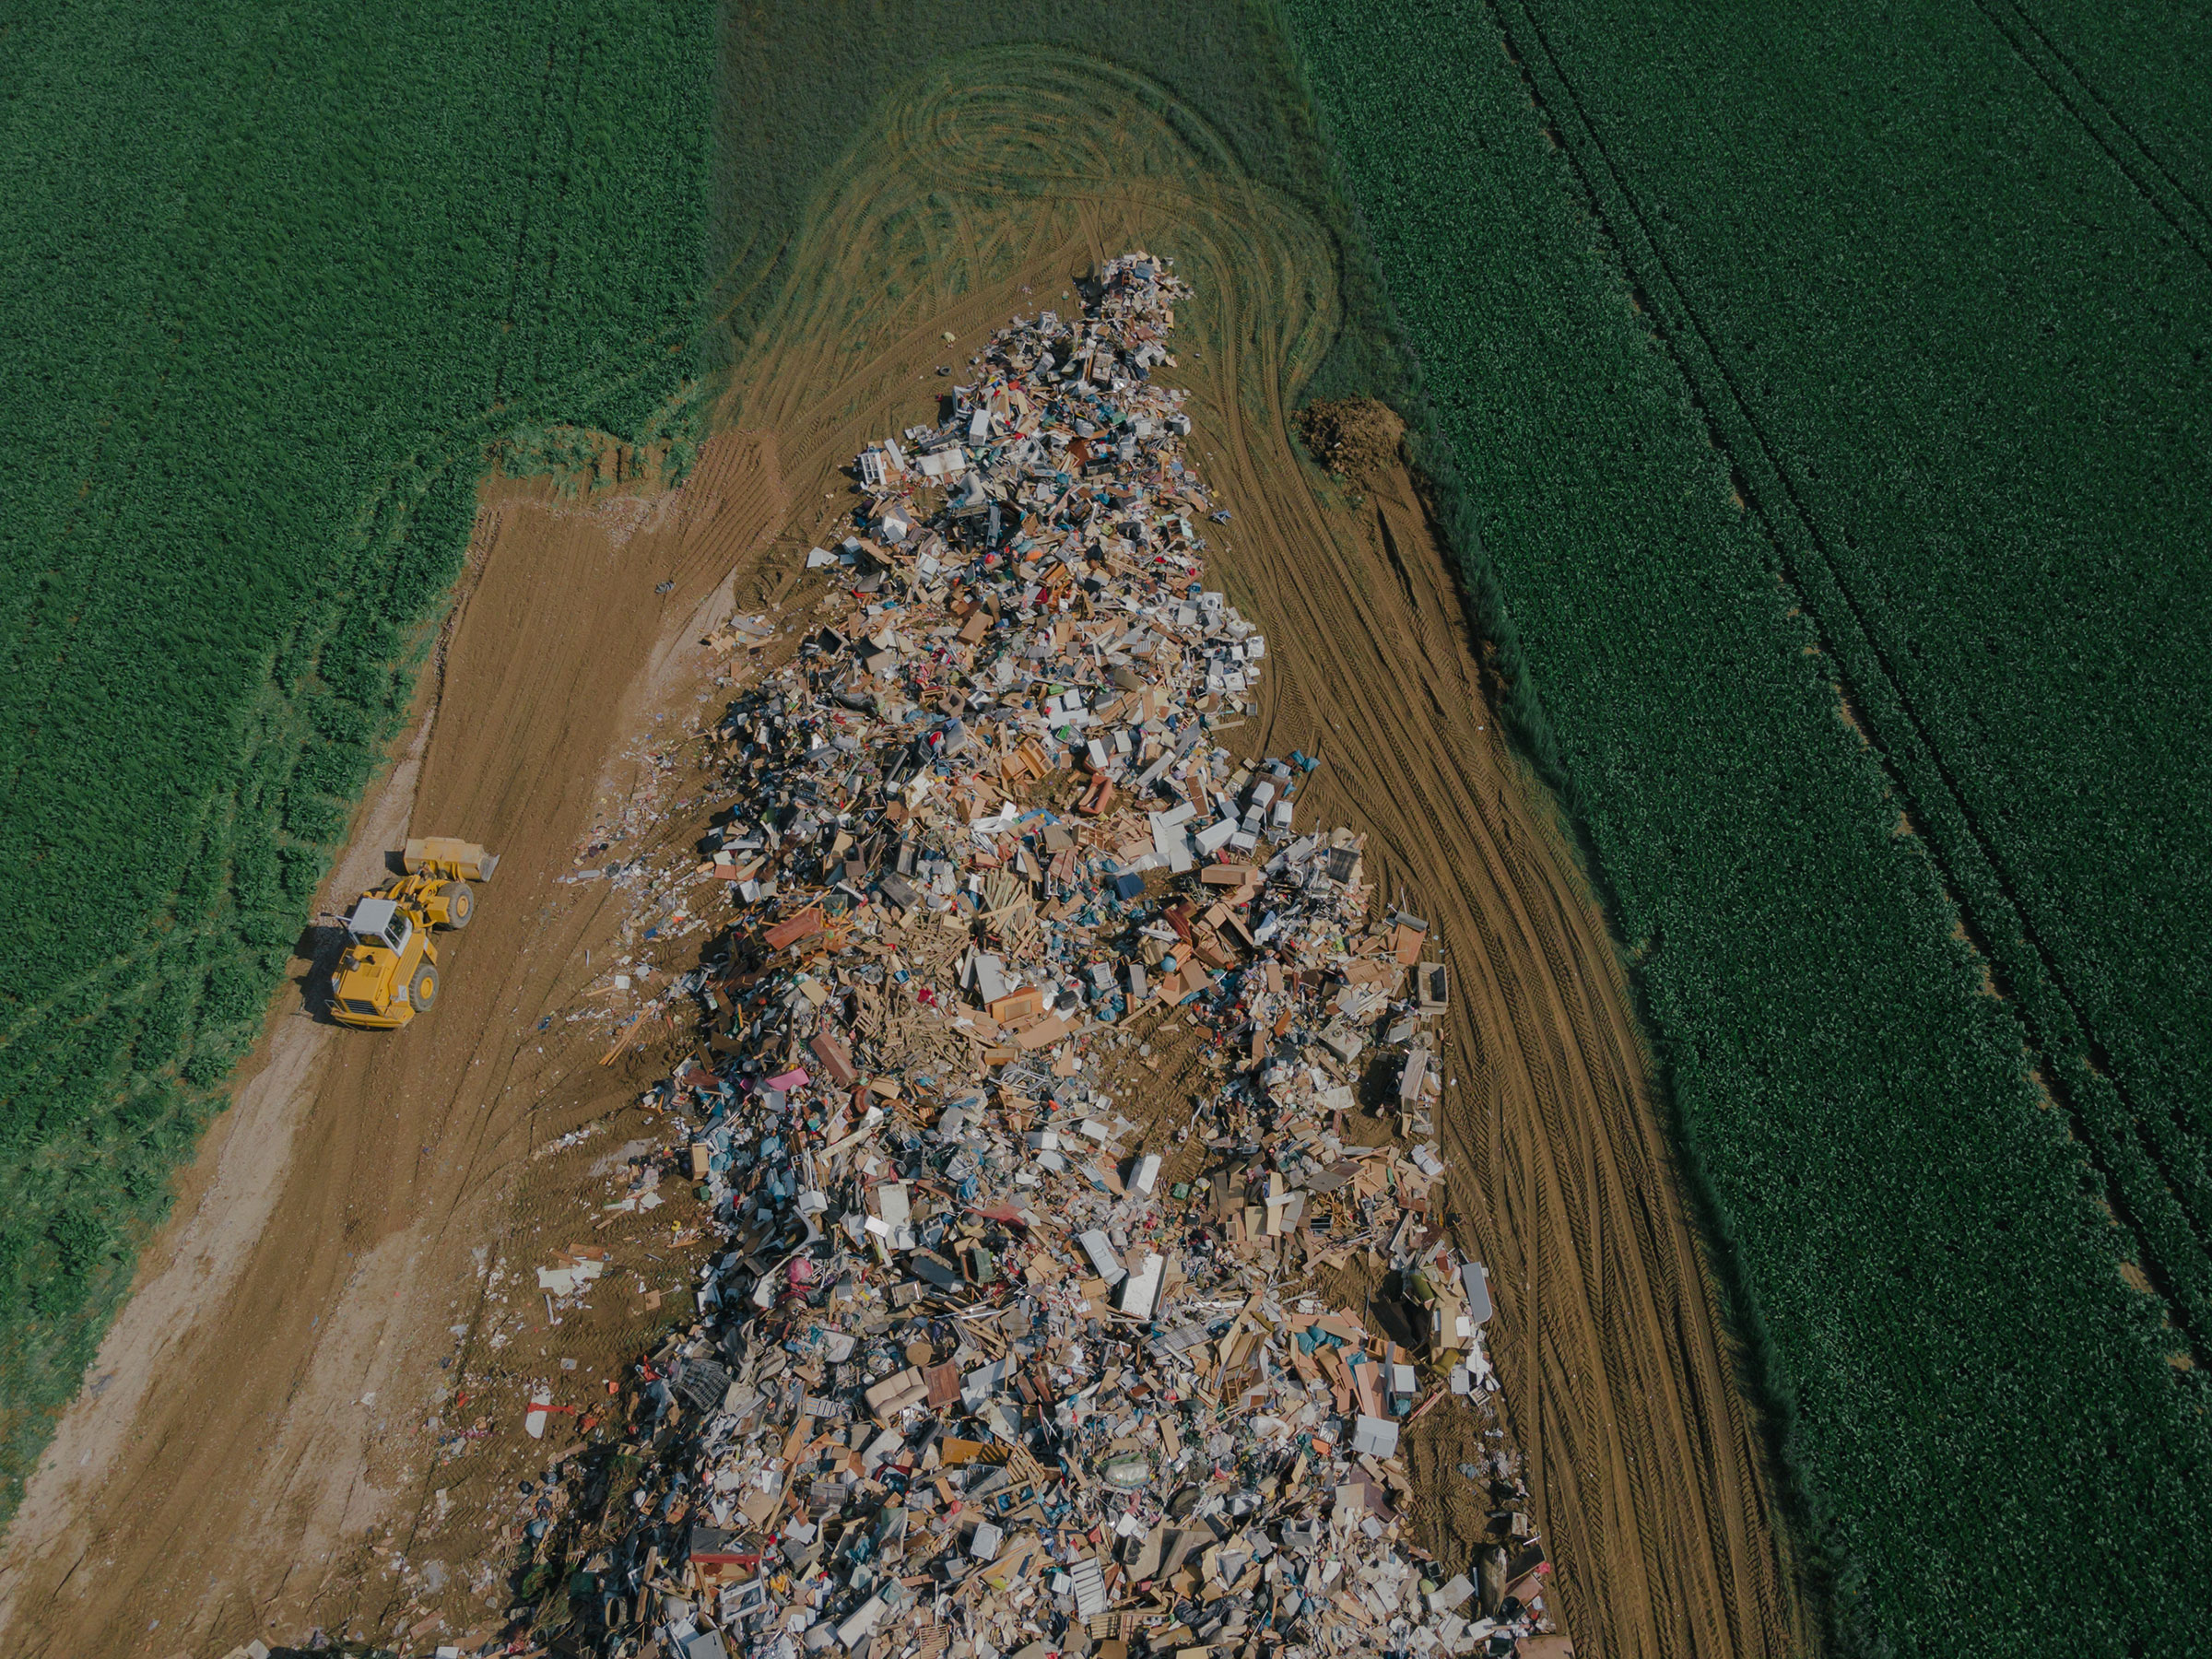 A temporary collection site for flood debris in Rheinbach, Germany, on July 17. (DOCKS Collective)